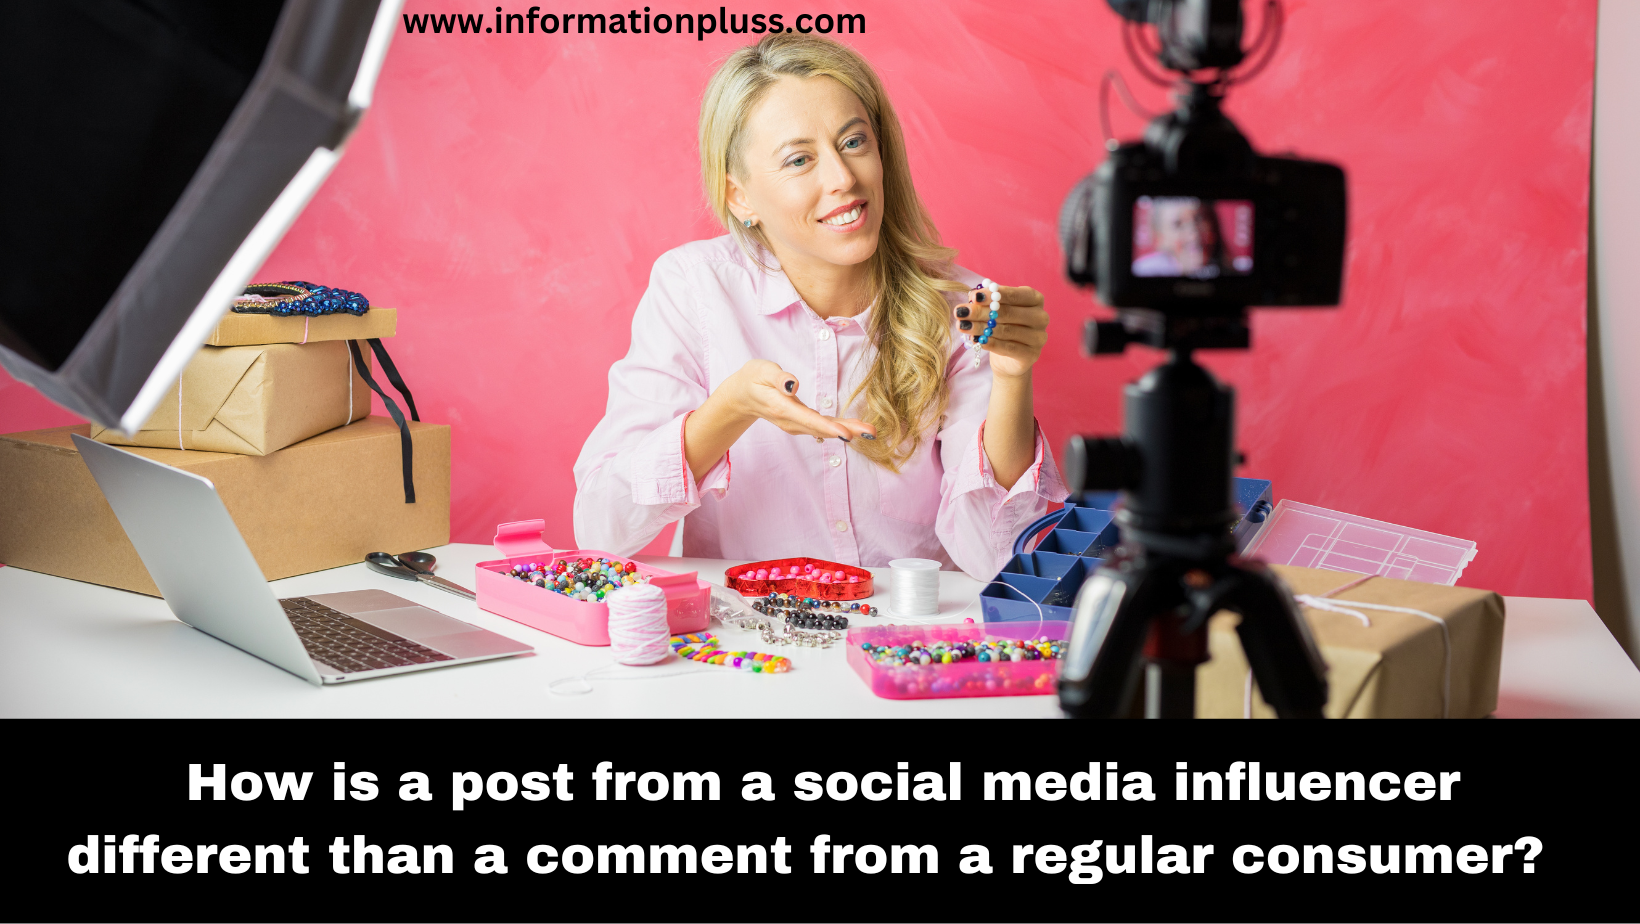 How is a post from a social media influencer different than a comment from a regular consumer?